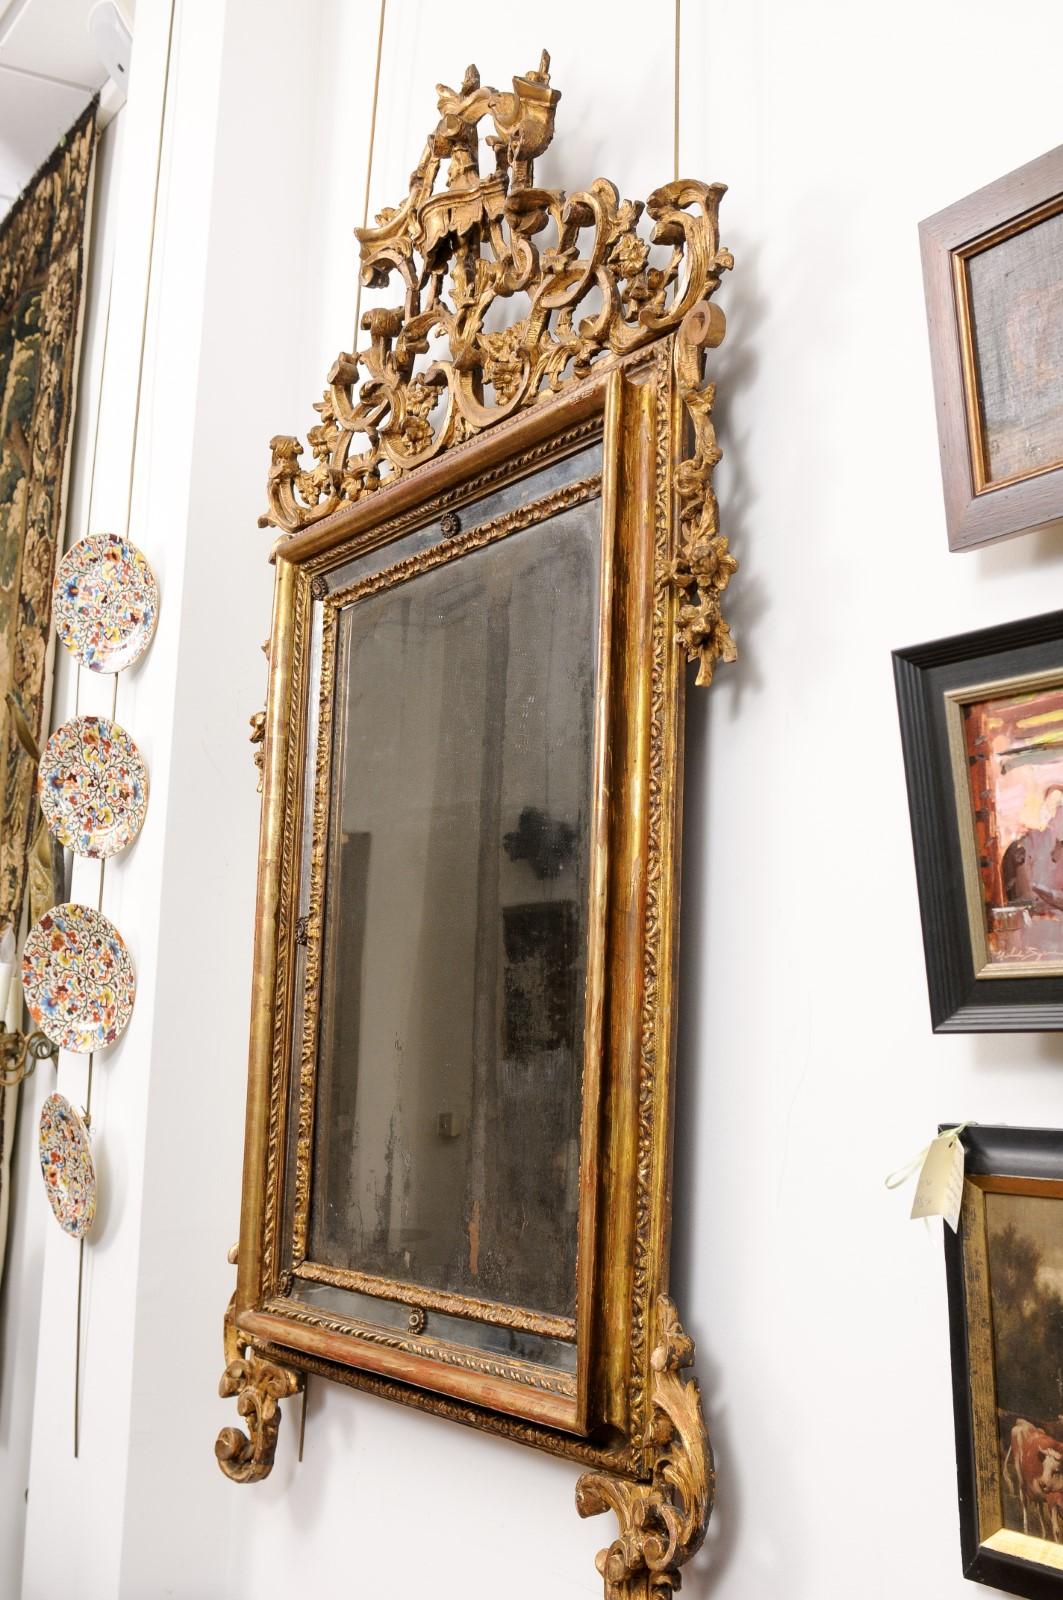 Large 18th Century Italian Rococo Giltwood Mirror with Pagoda Top For Sale 7